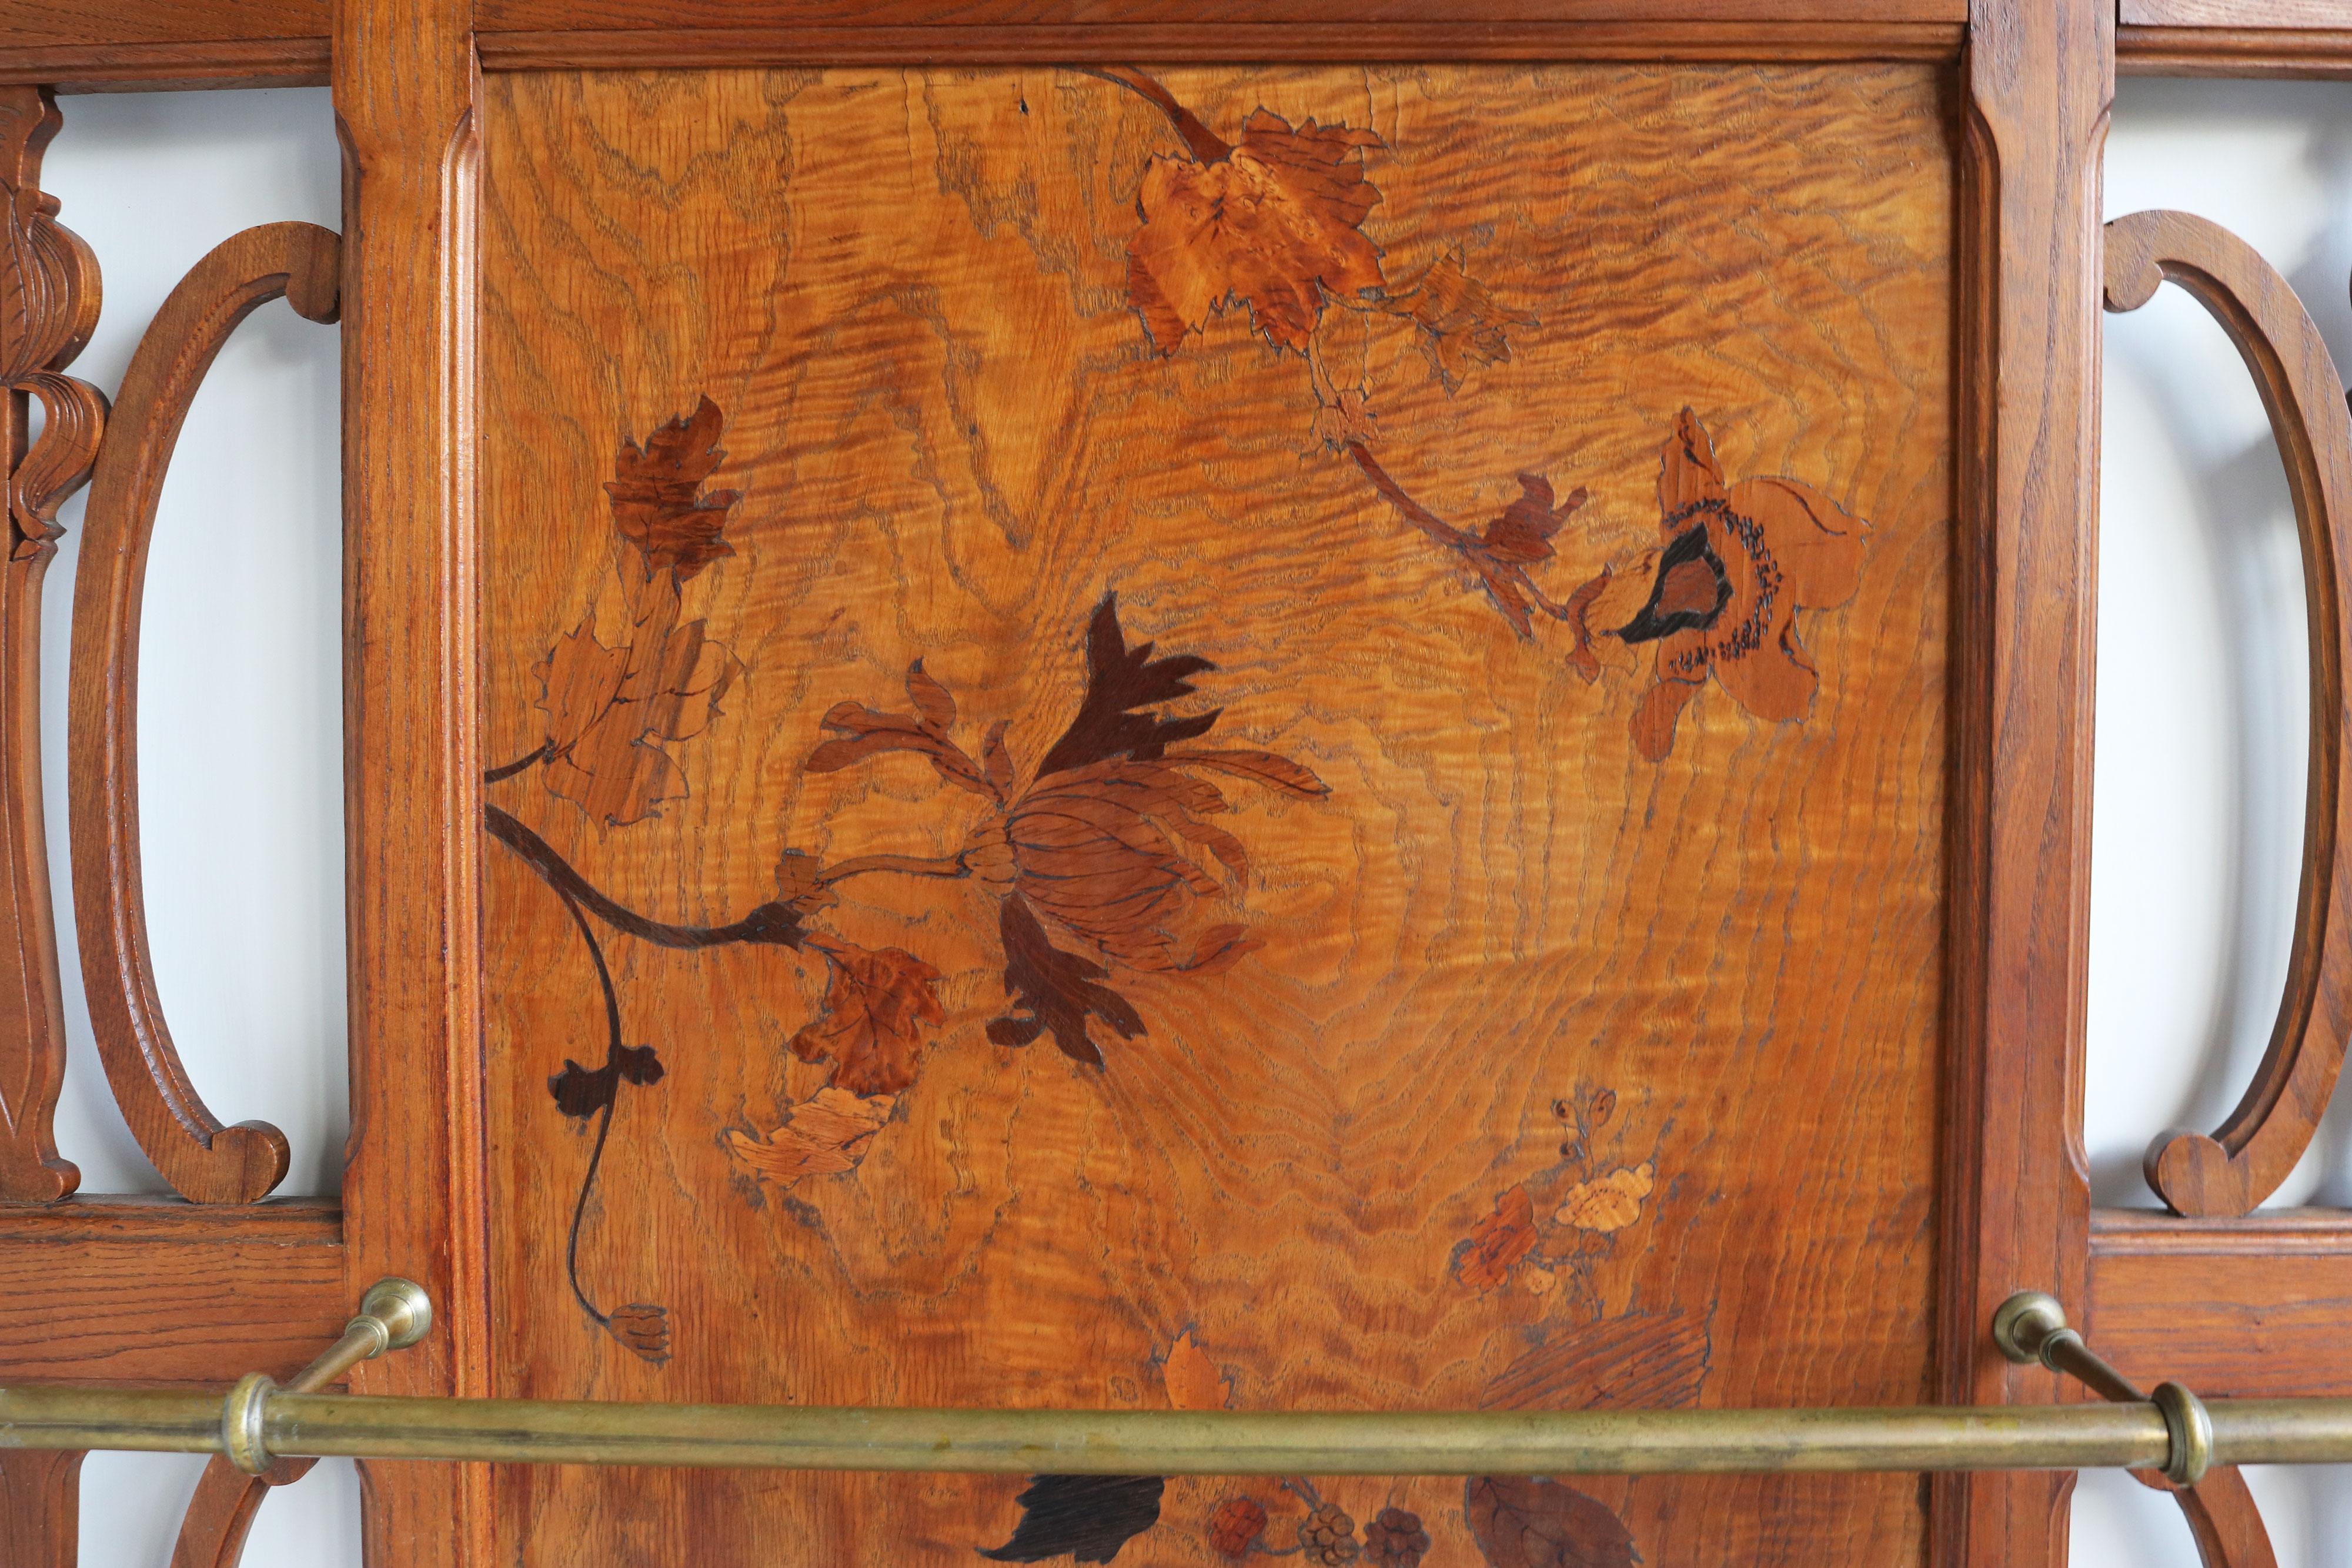 French Art nouveau hall tree / coat rack by Emile galle 1905 marquetry hallway For Sale 3